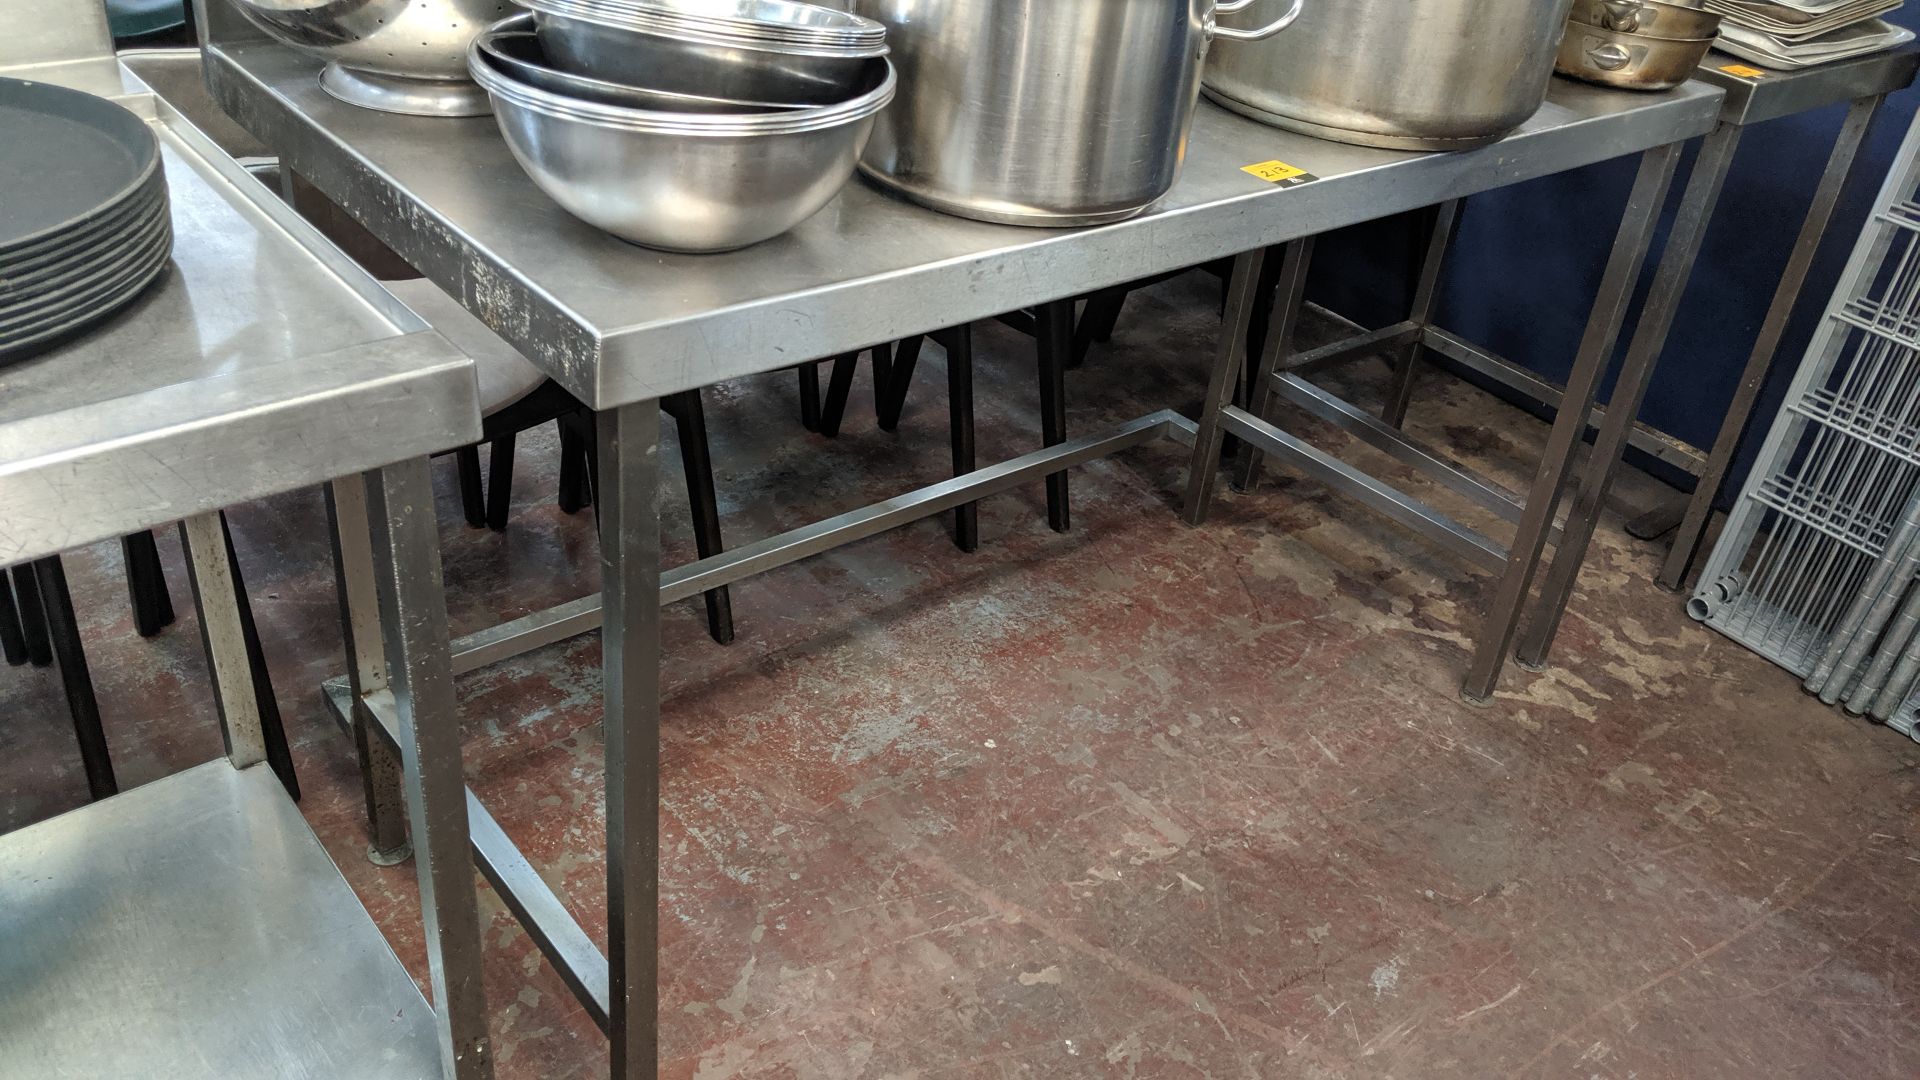 Stainless steel table circa 1450mm x 700mm IMPORTANT: Please remember goods successfully bid upon - Image 2 of 2